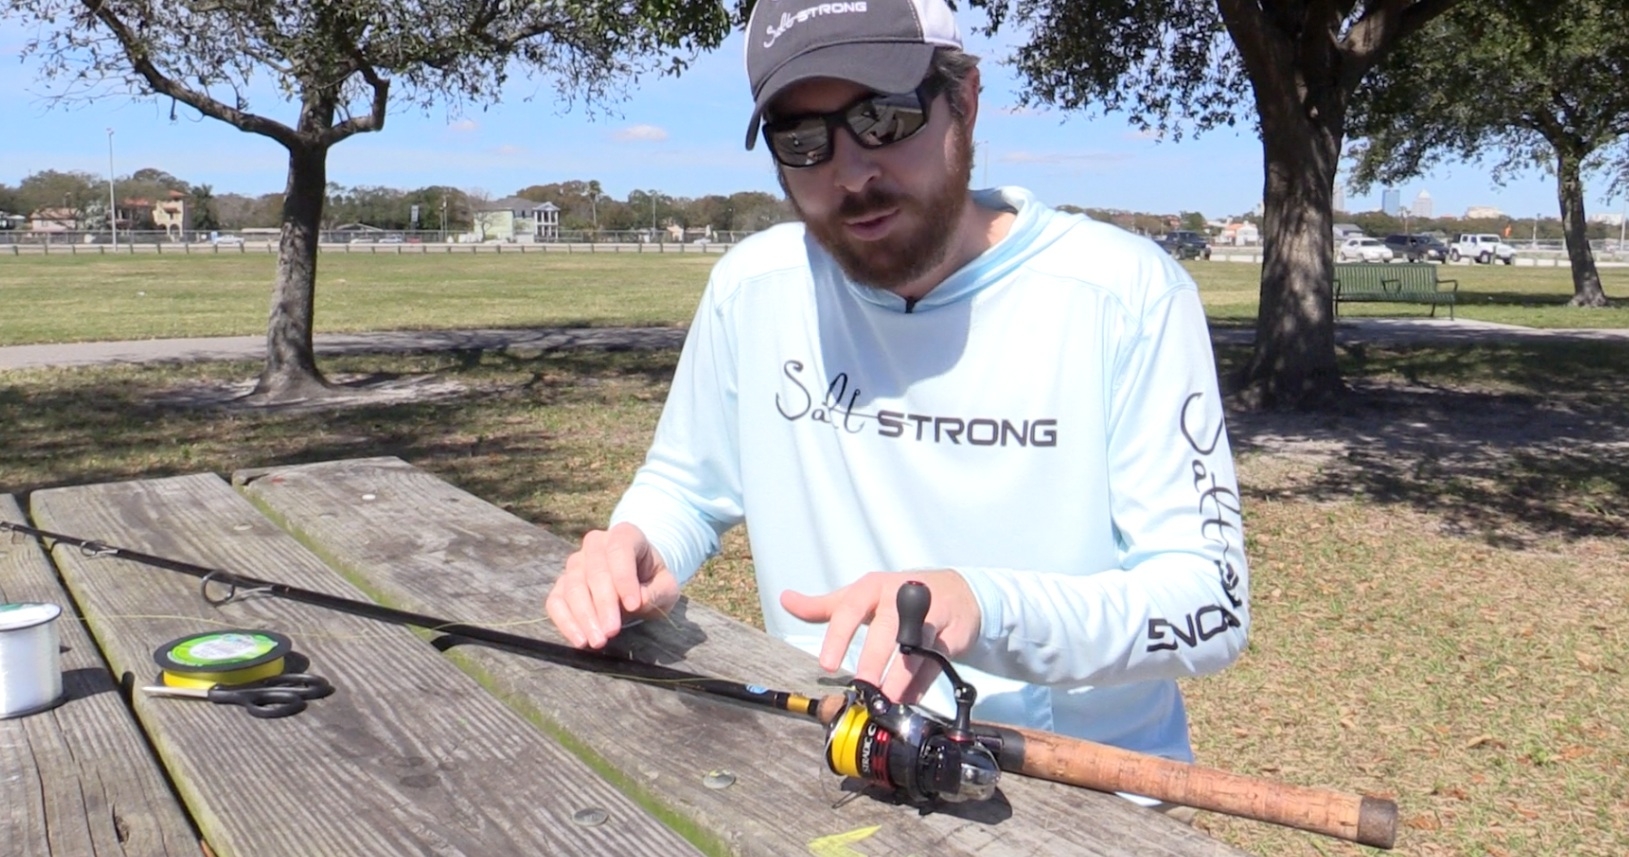 How To Make Your Own Hook Keeper (DIY Fishing Rod Hack)